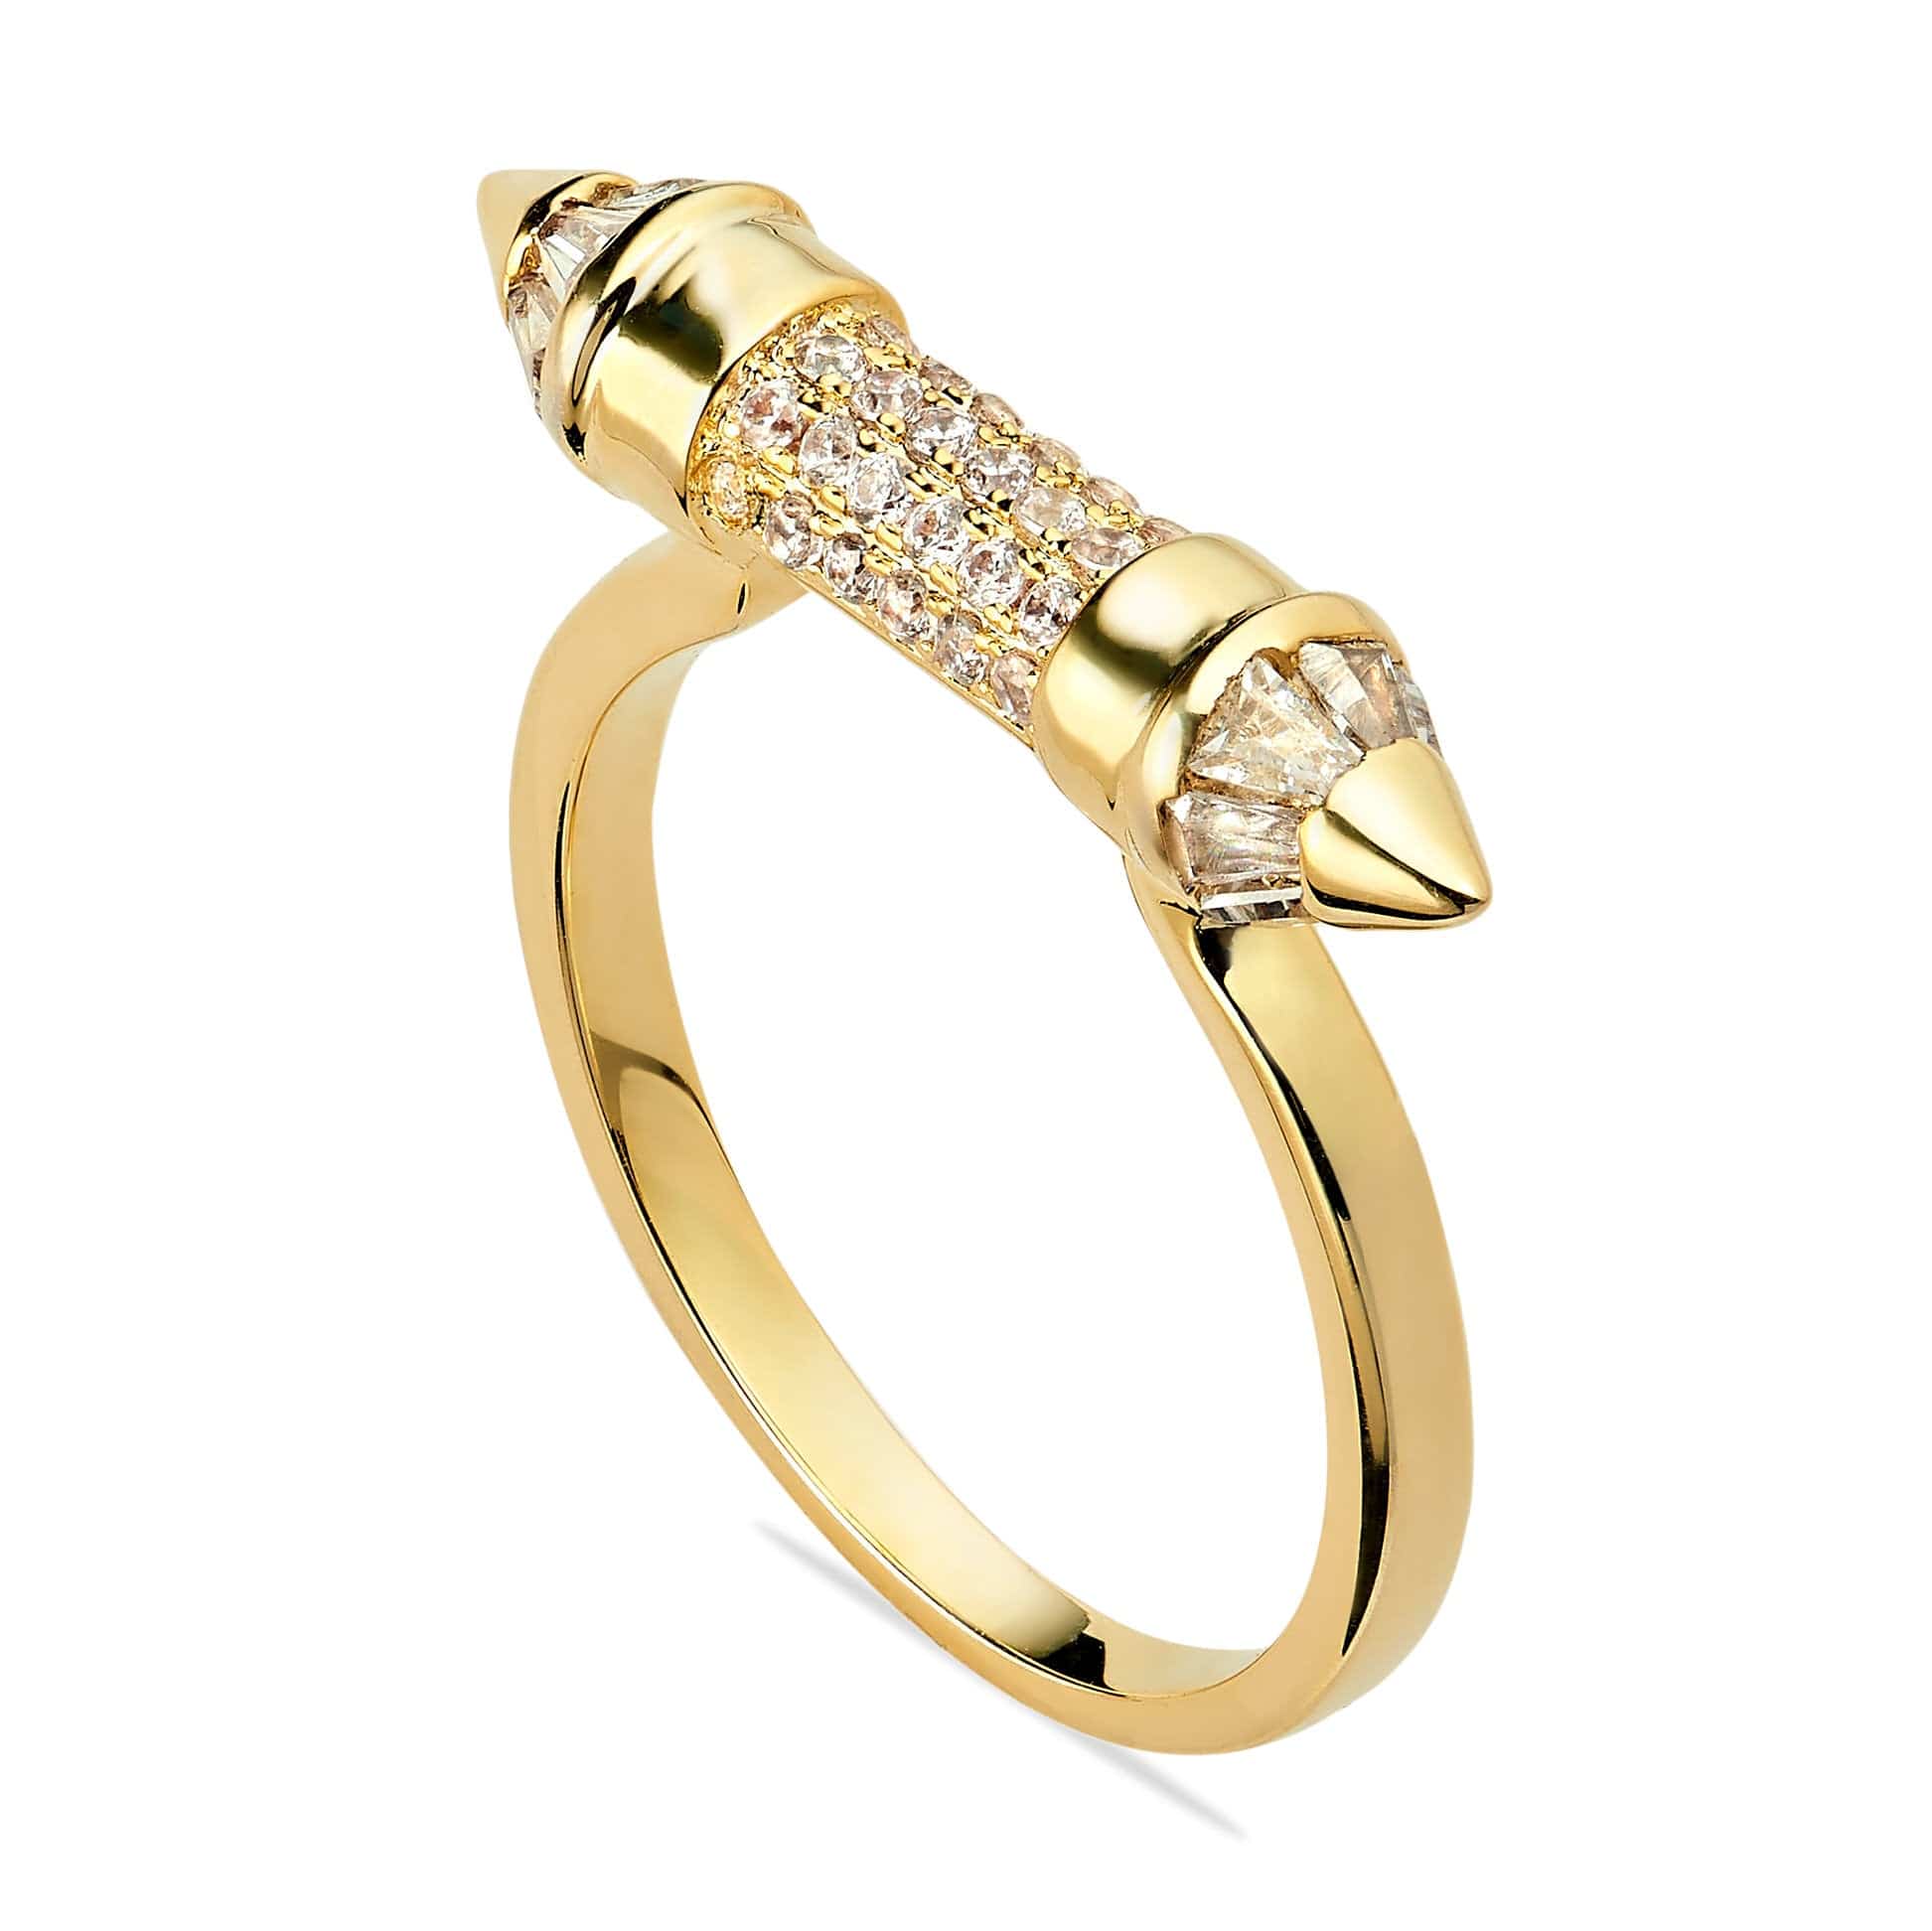 Opes Robur POINTED RING - GOLD